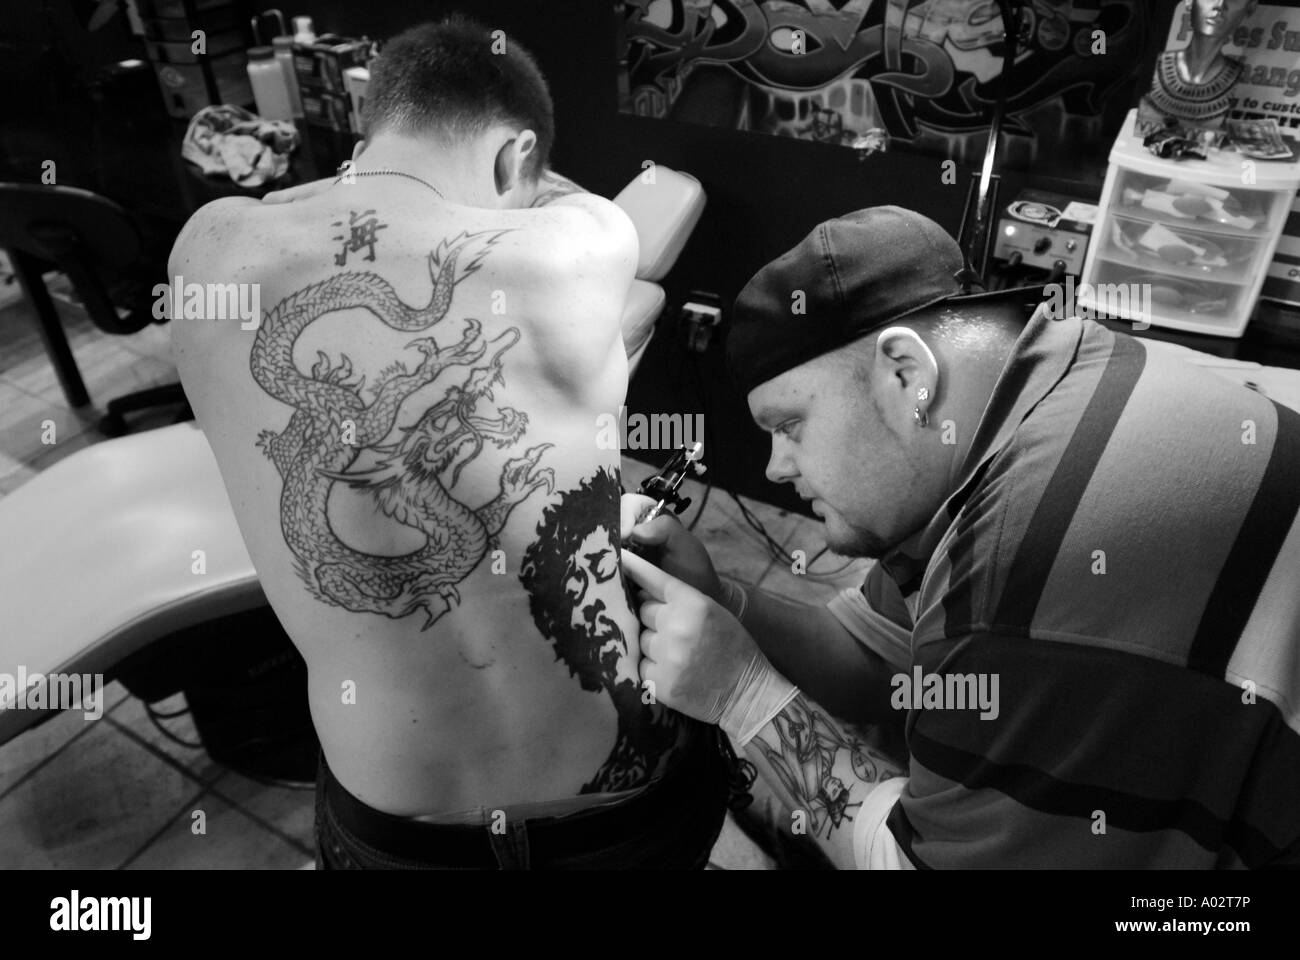 A Tattoo Artist inks a Jimi Hendrix tatoo on a man's back in black and white  Stock Photo - Alamy